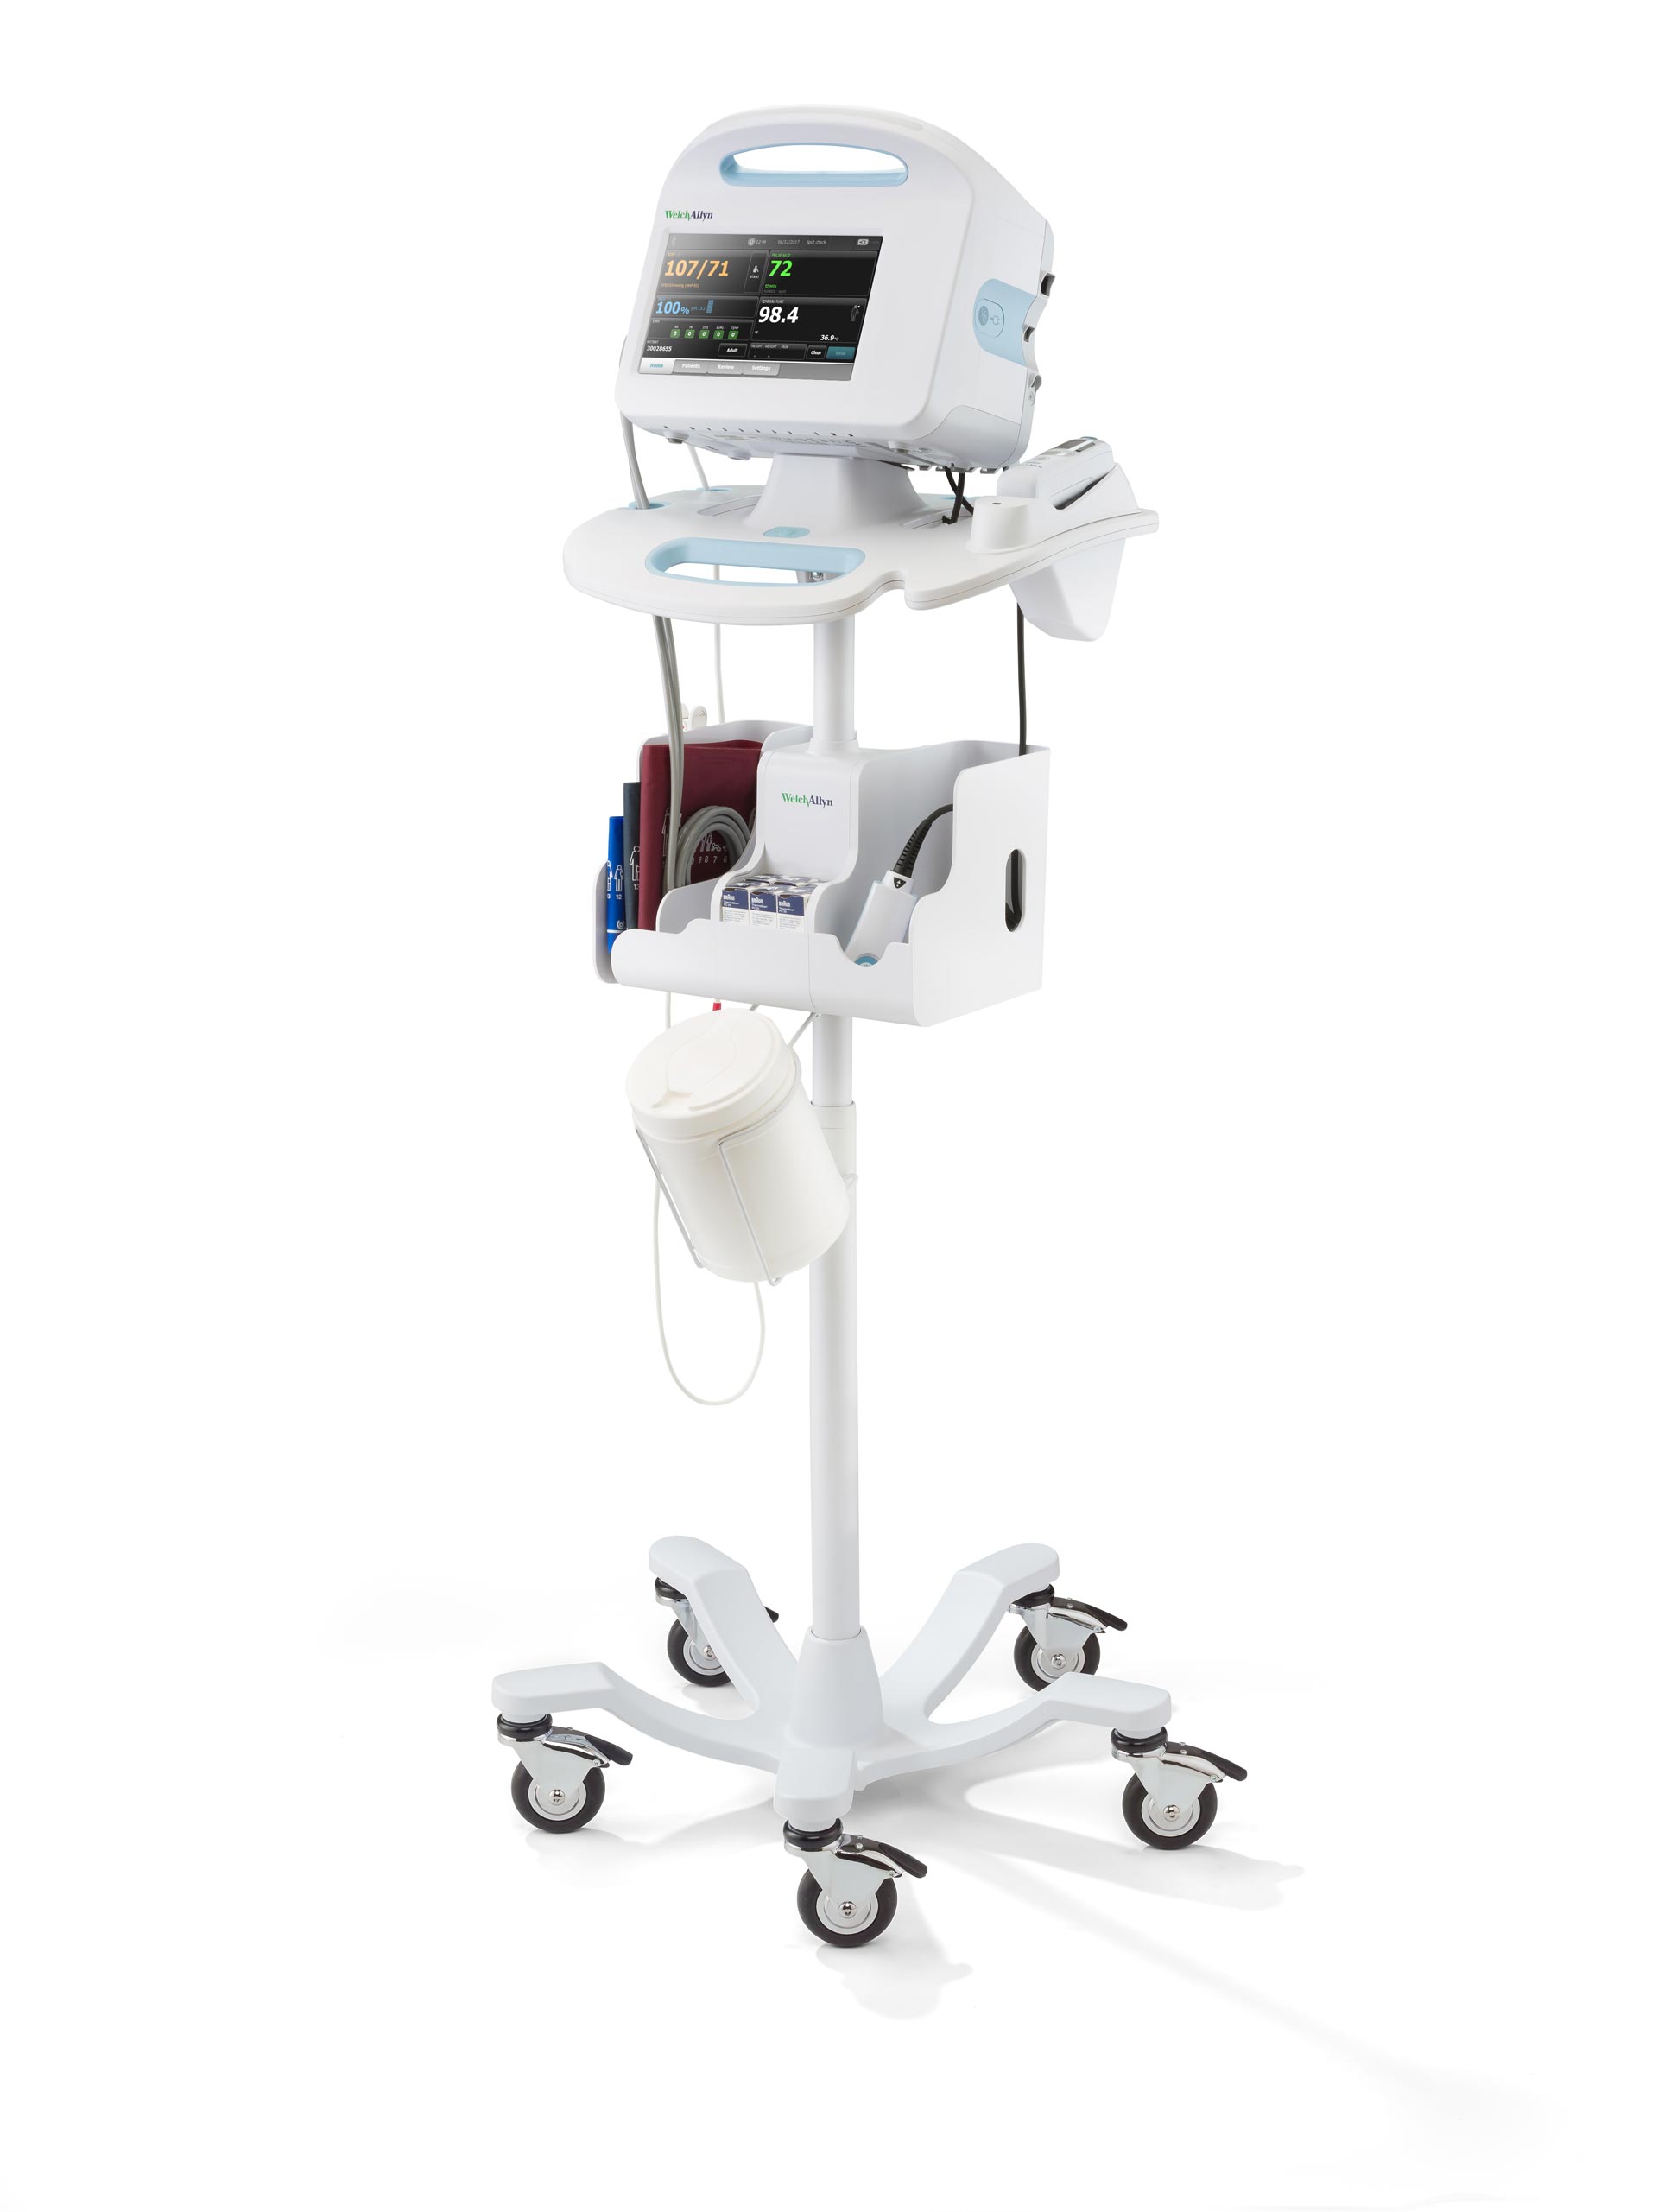 Medical equipment: How to Read a Vital Signs Monitor